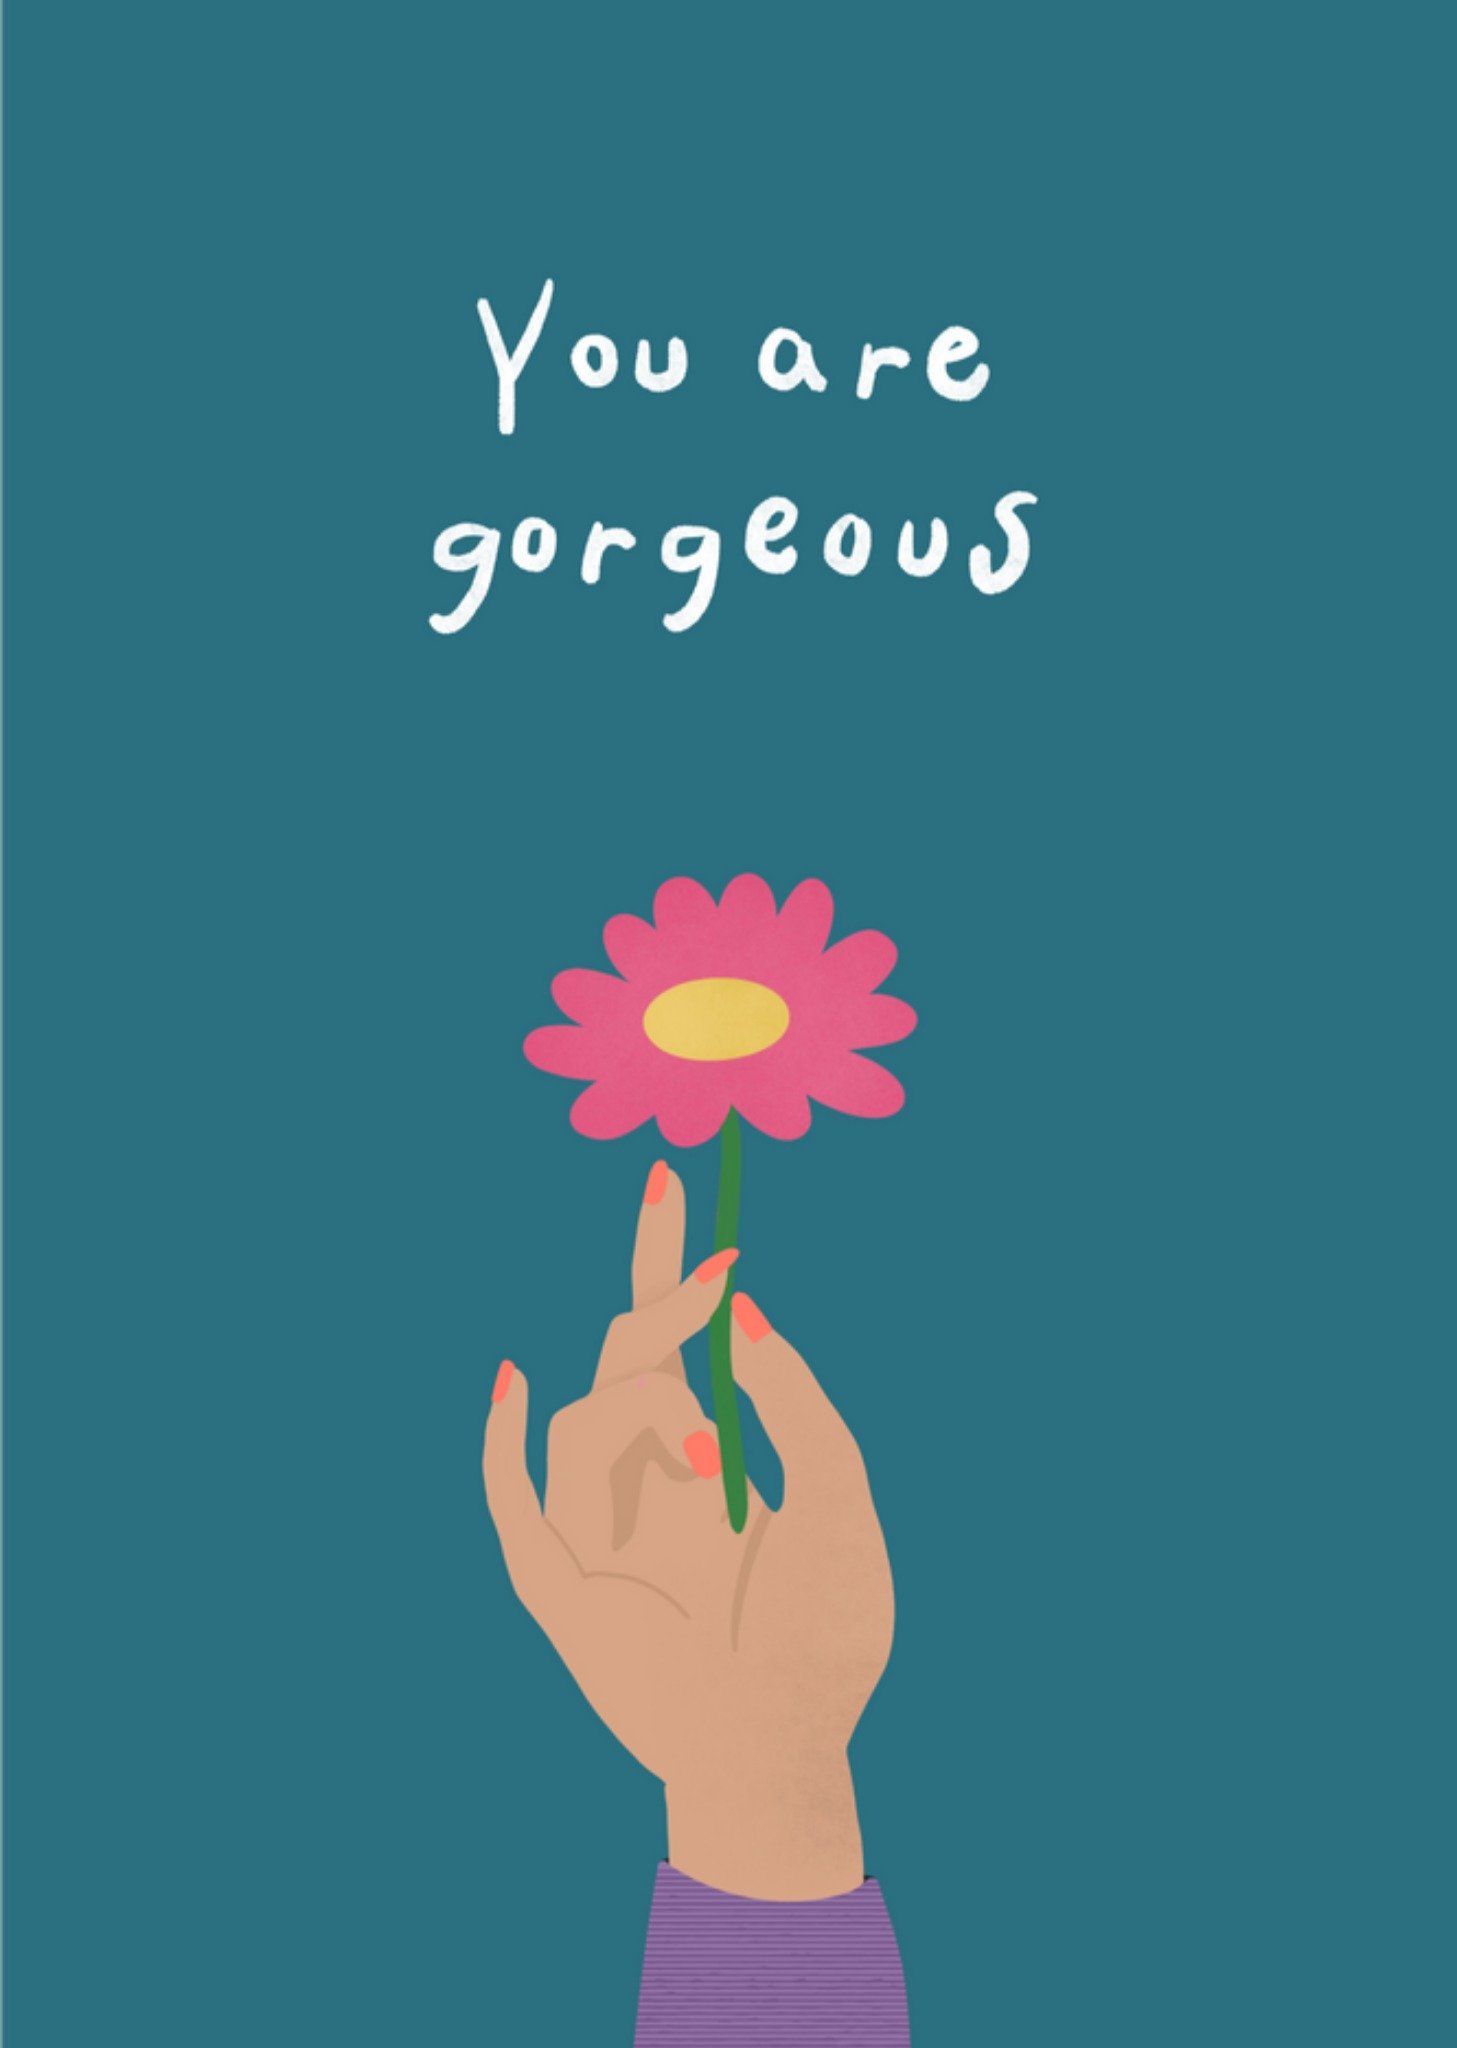 Complimentendag - You are gorgeous